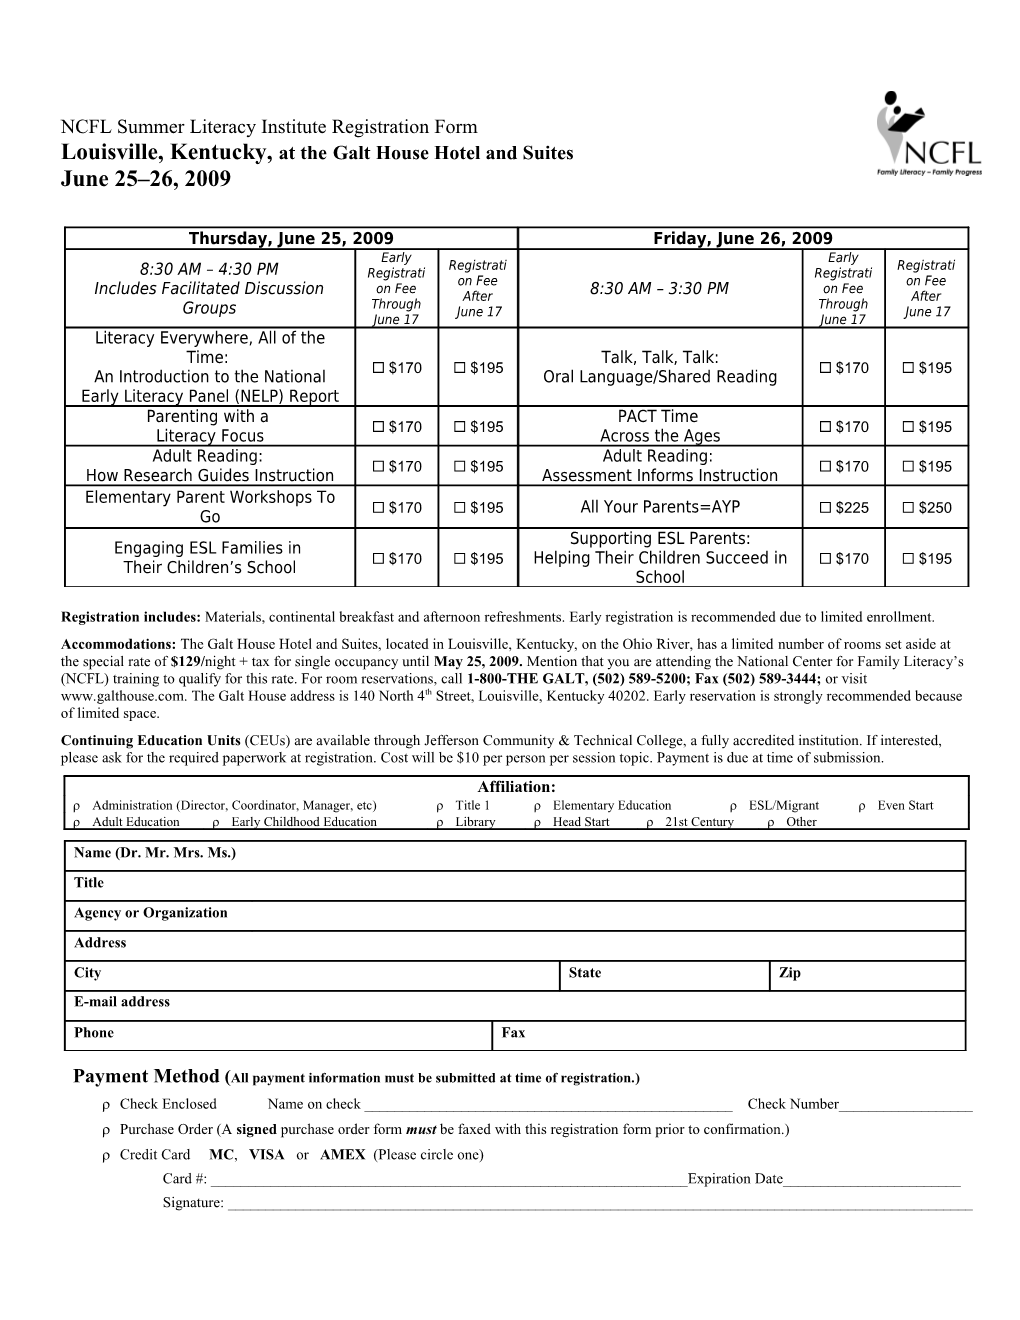 National Center for Family Literacy Training Schedule